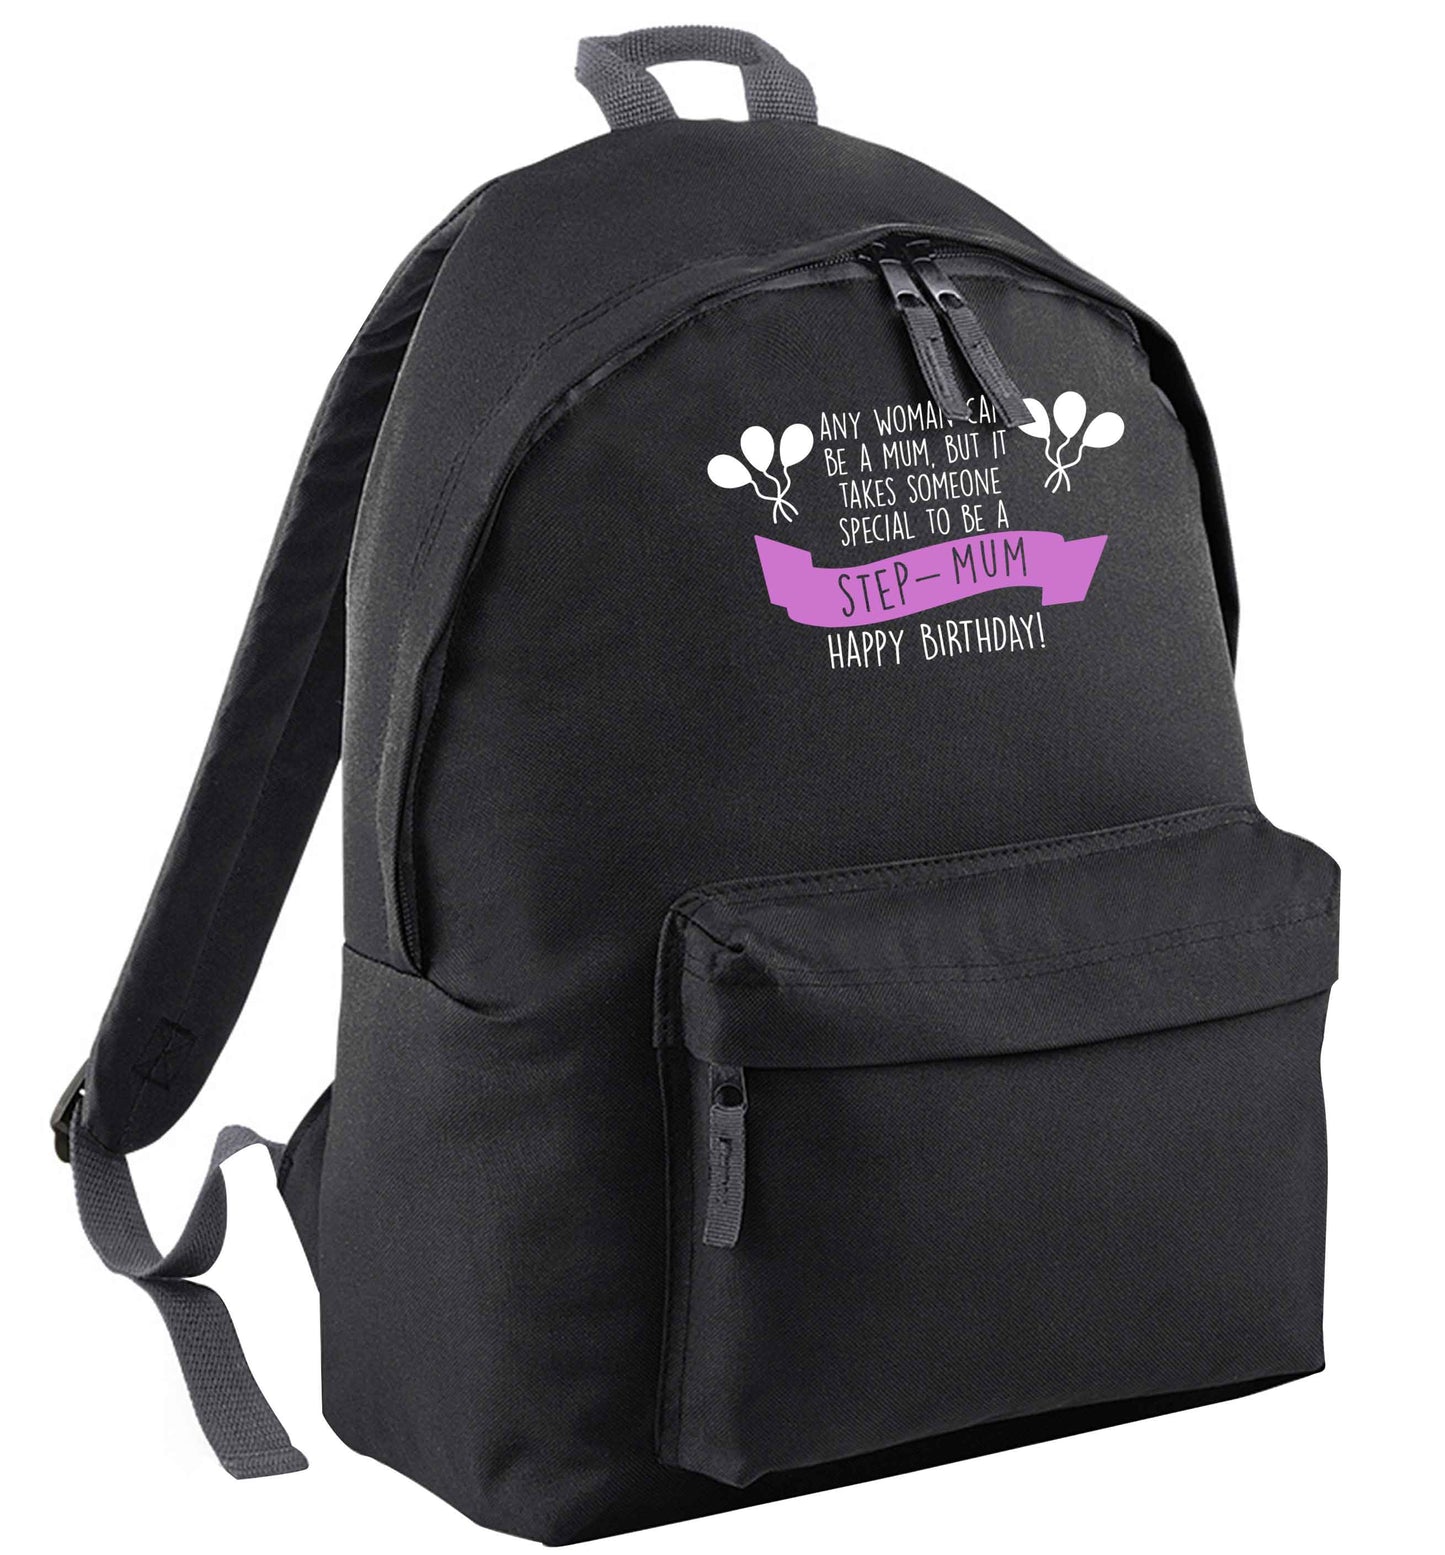 Takes someone special to be a step-mum, happy birthday! | Children's backpack